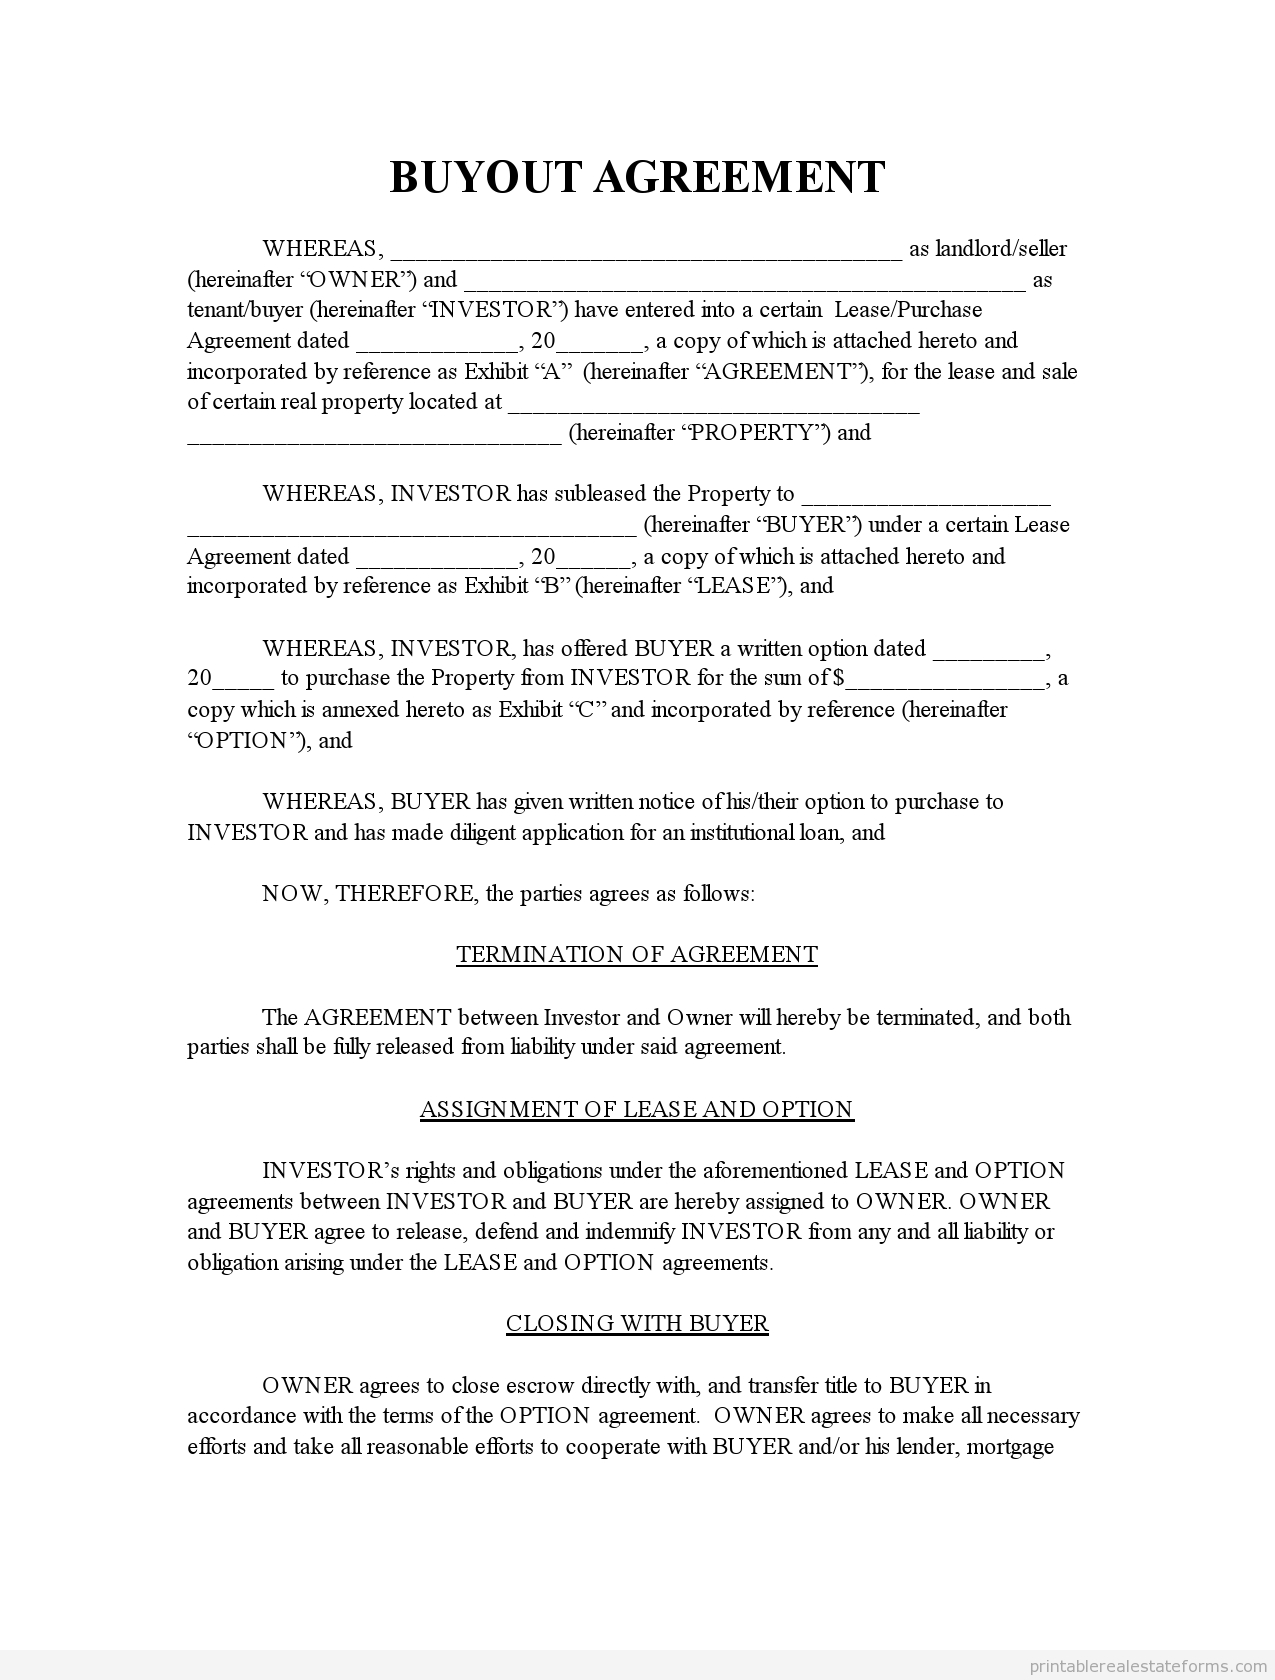 Free Buyout Agreement Template Real Estate Buyout Agreement Form with Buyout Agreement Template